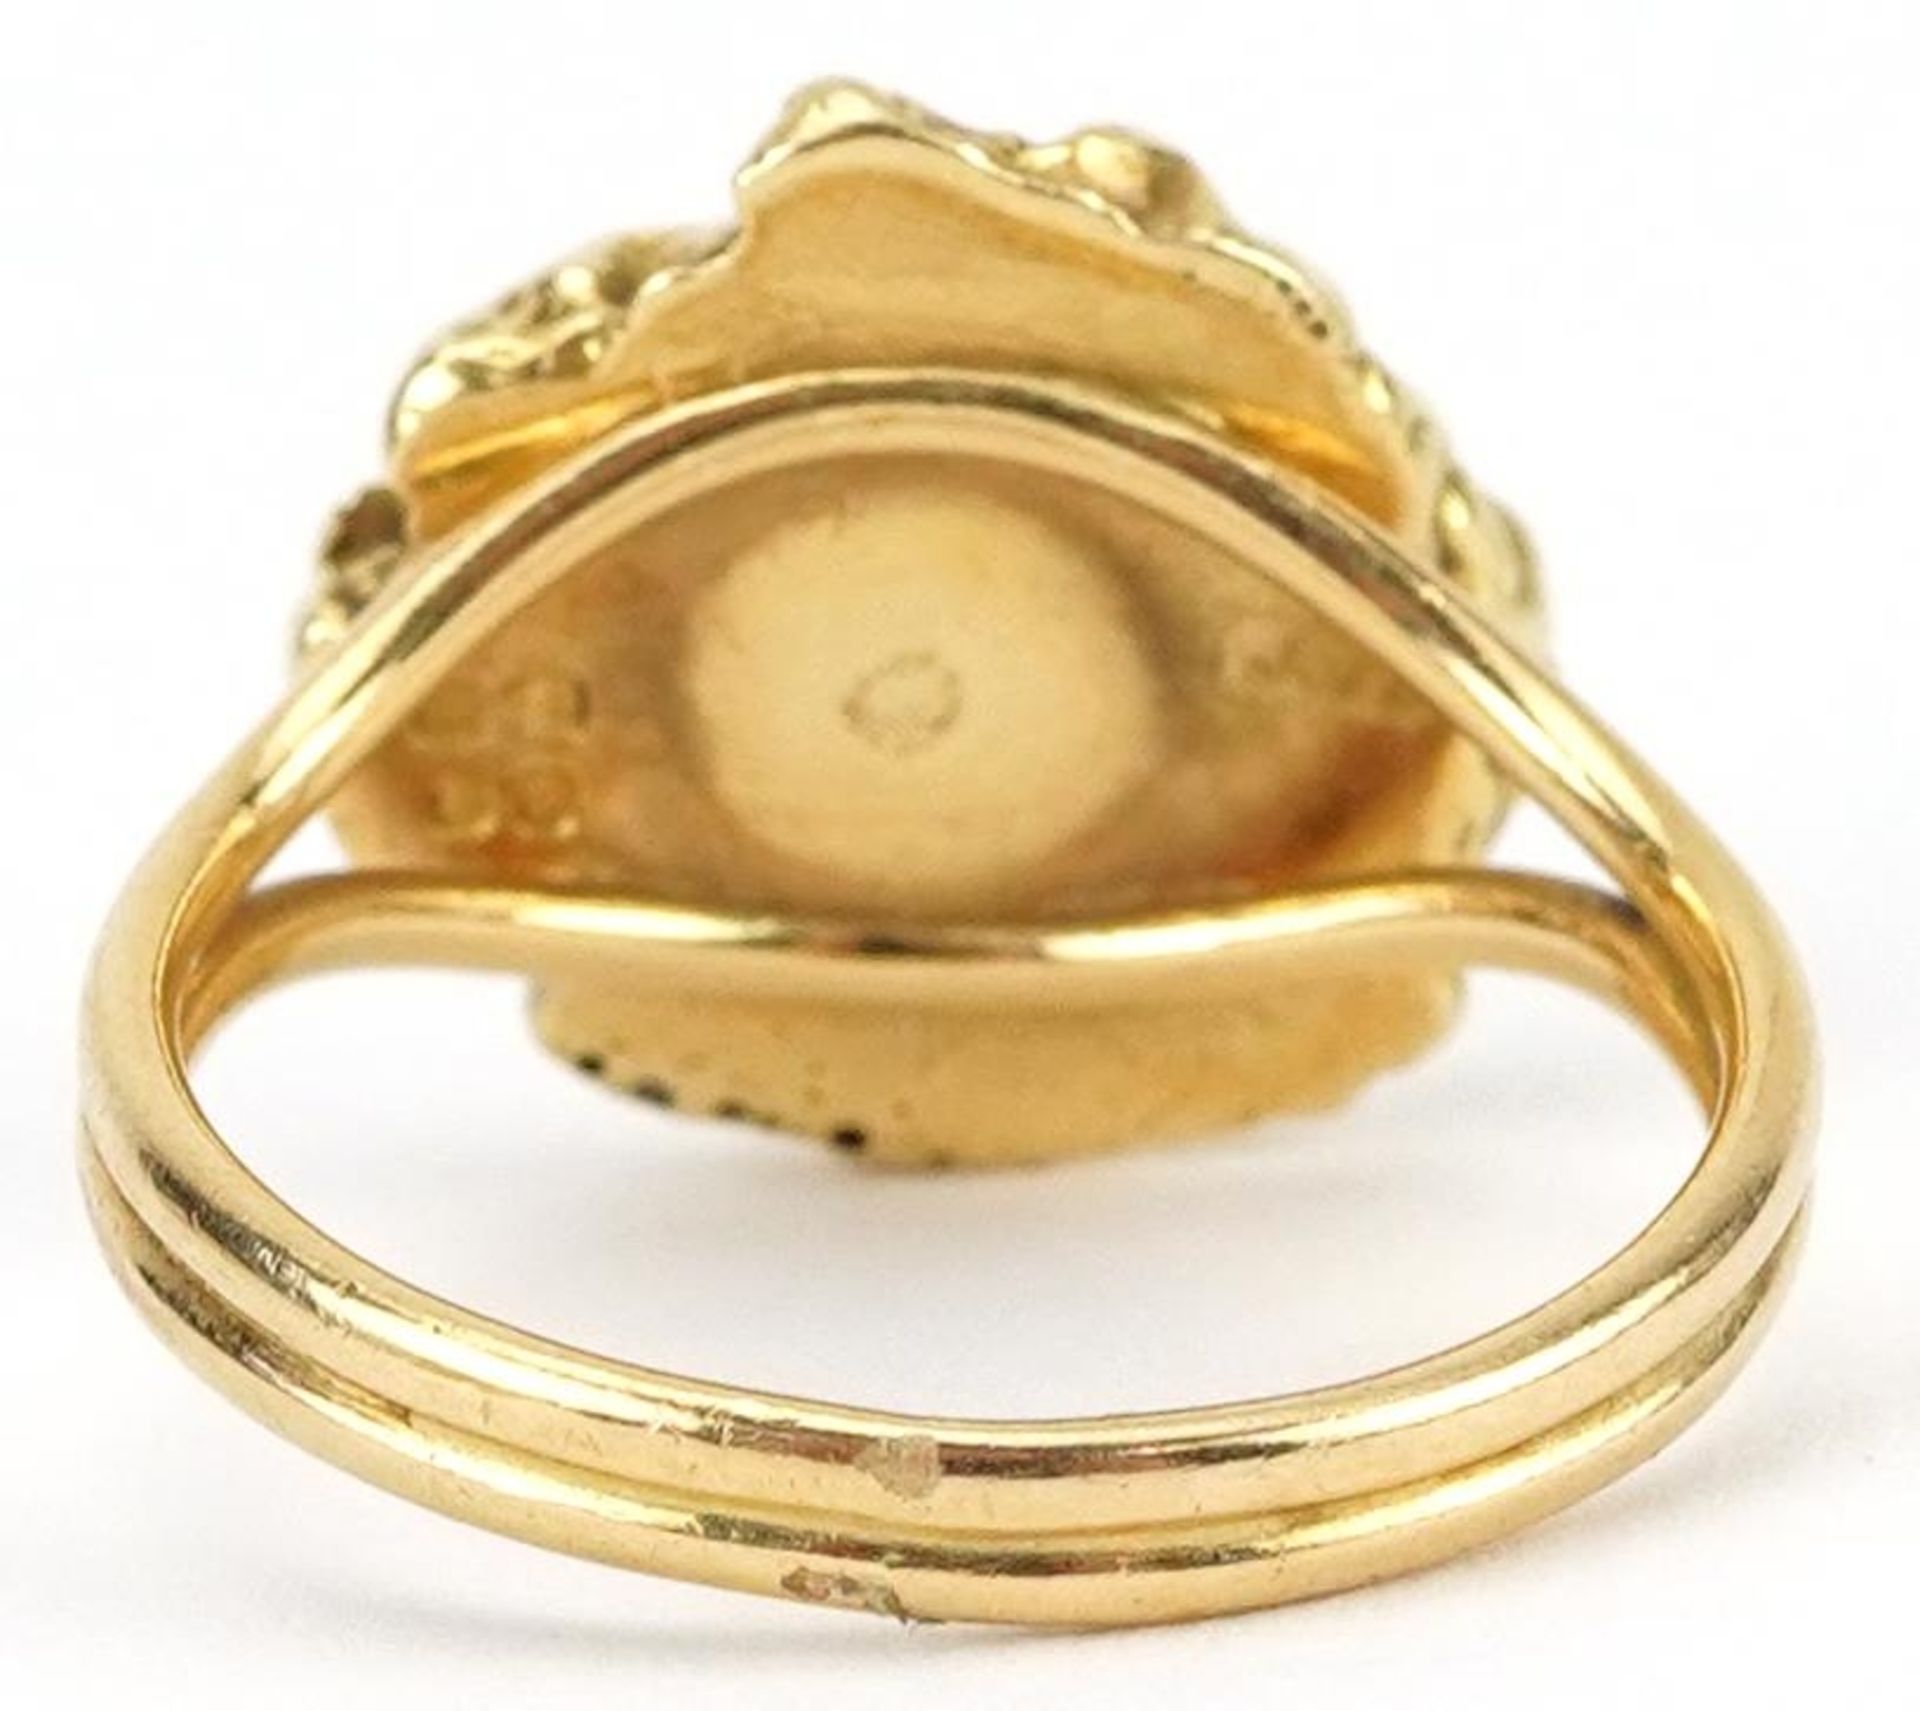 John Donald, 1960's 18ct gold ring in the form of a gold nugget, London 1969, size K, 6.8g - Image 2 of 5